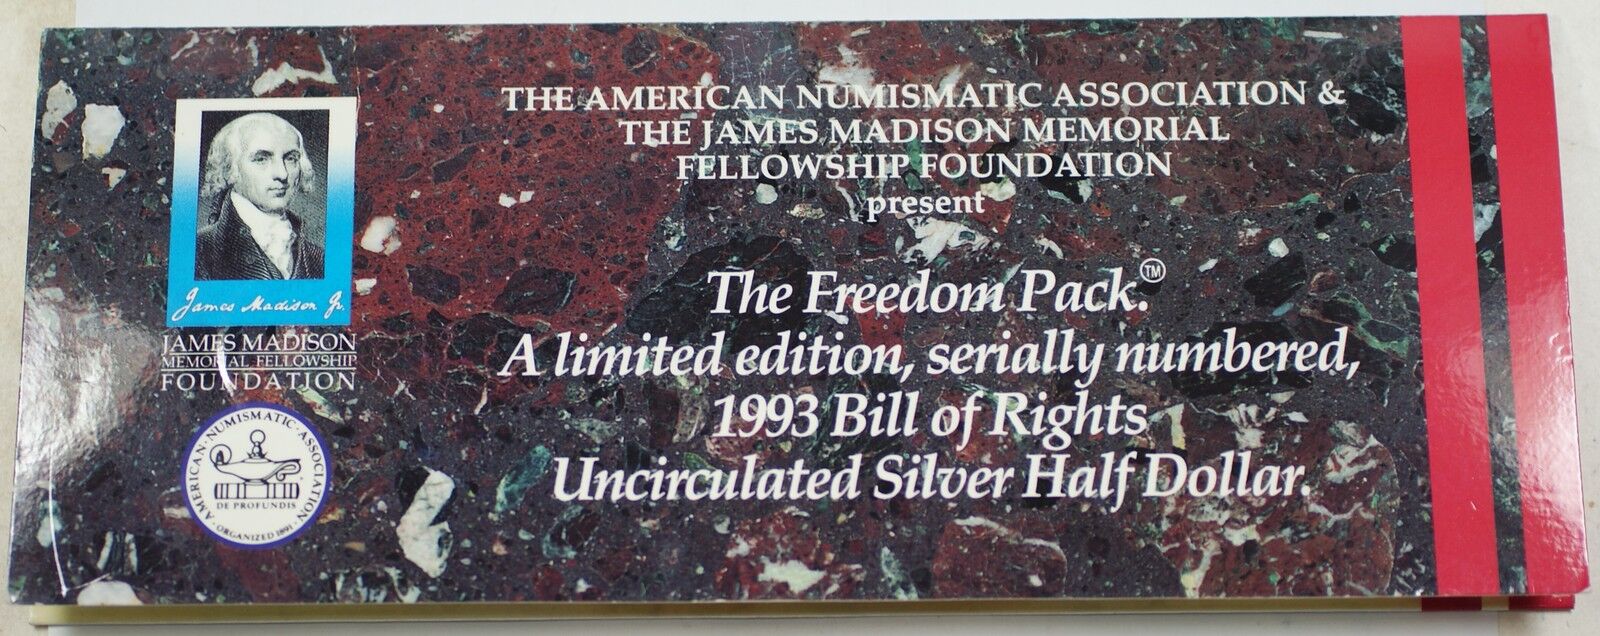 1993 Limited Edition Serially Numbered Bill of Rights UNC Silver 50c Coin DGH